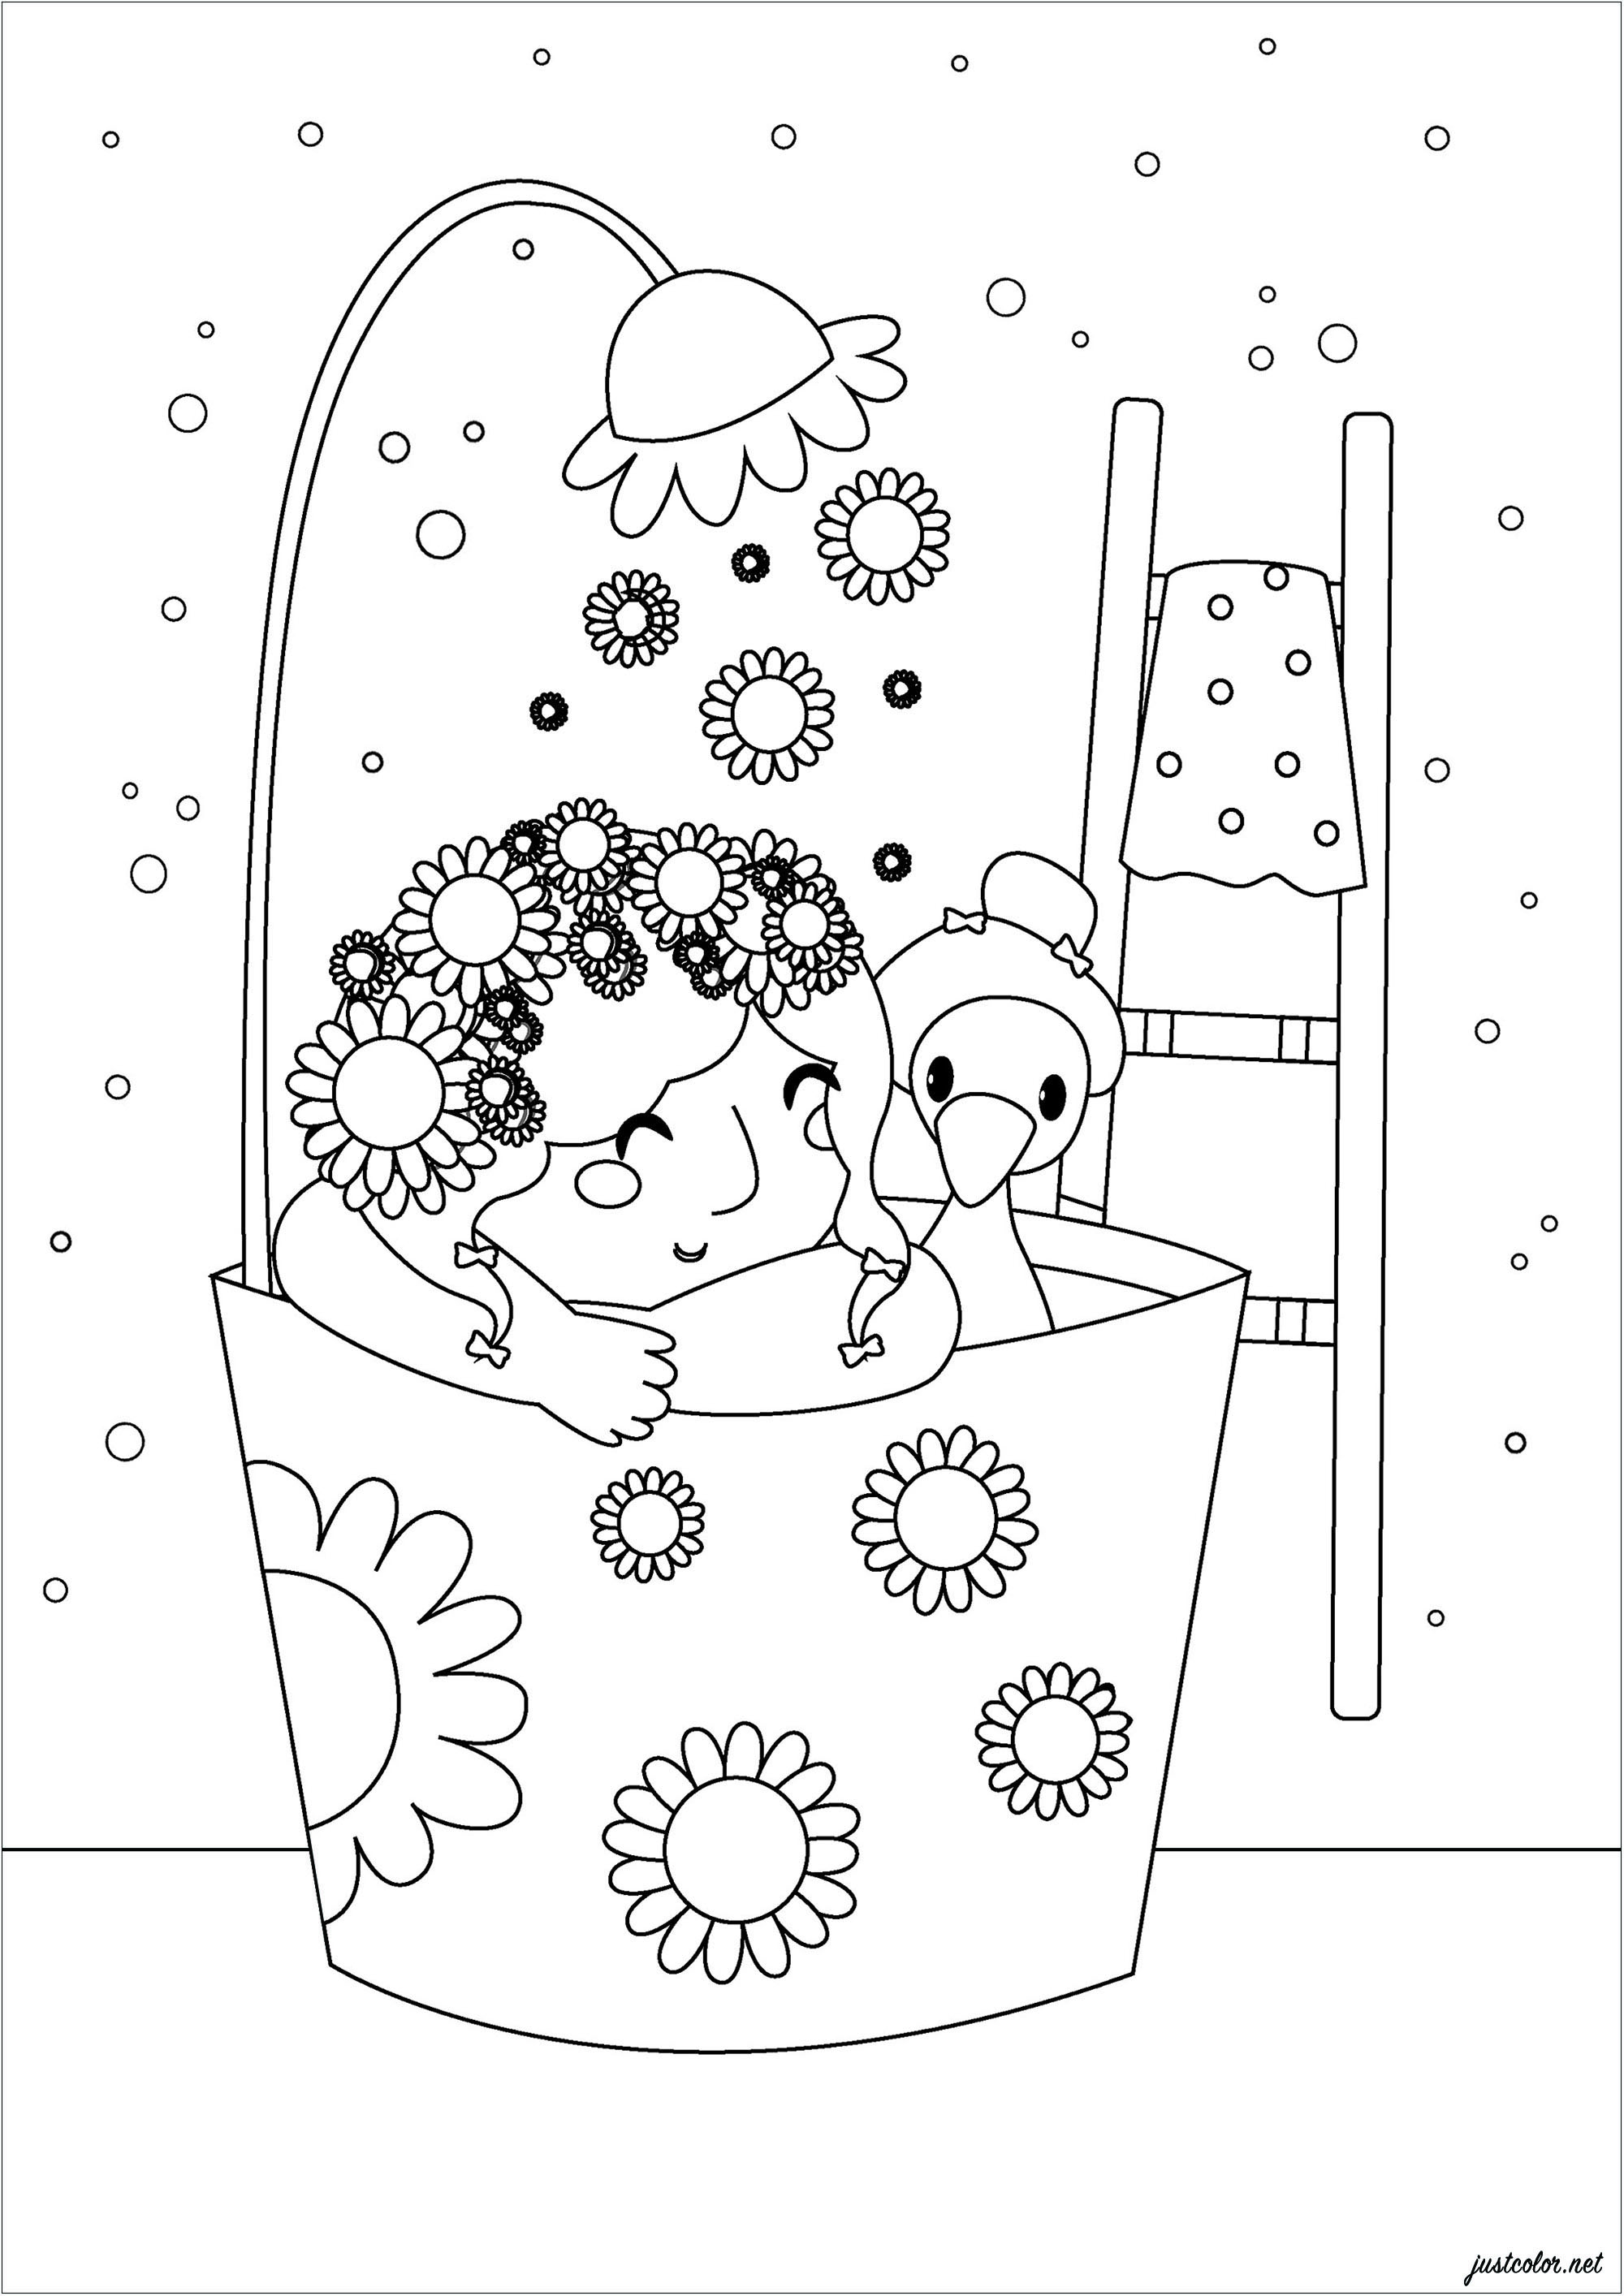 A funny bath whose shower is a flower ... A very Zen moment awaits you with this pretty coloring book, Artist : Gaelle Picard